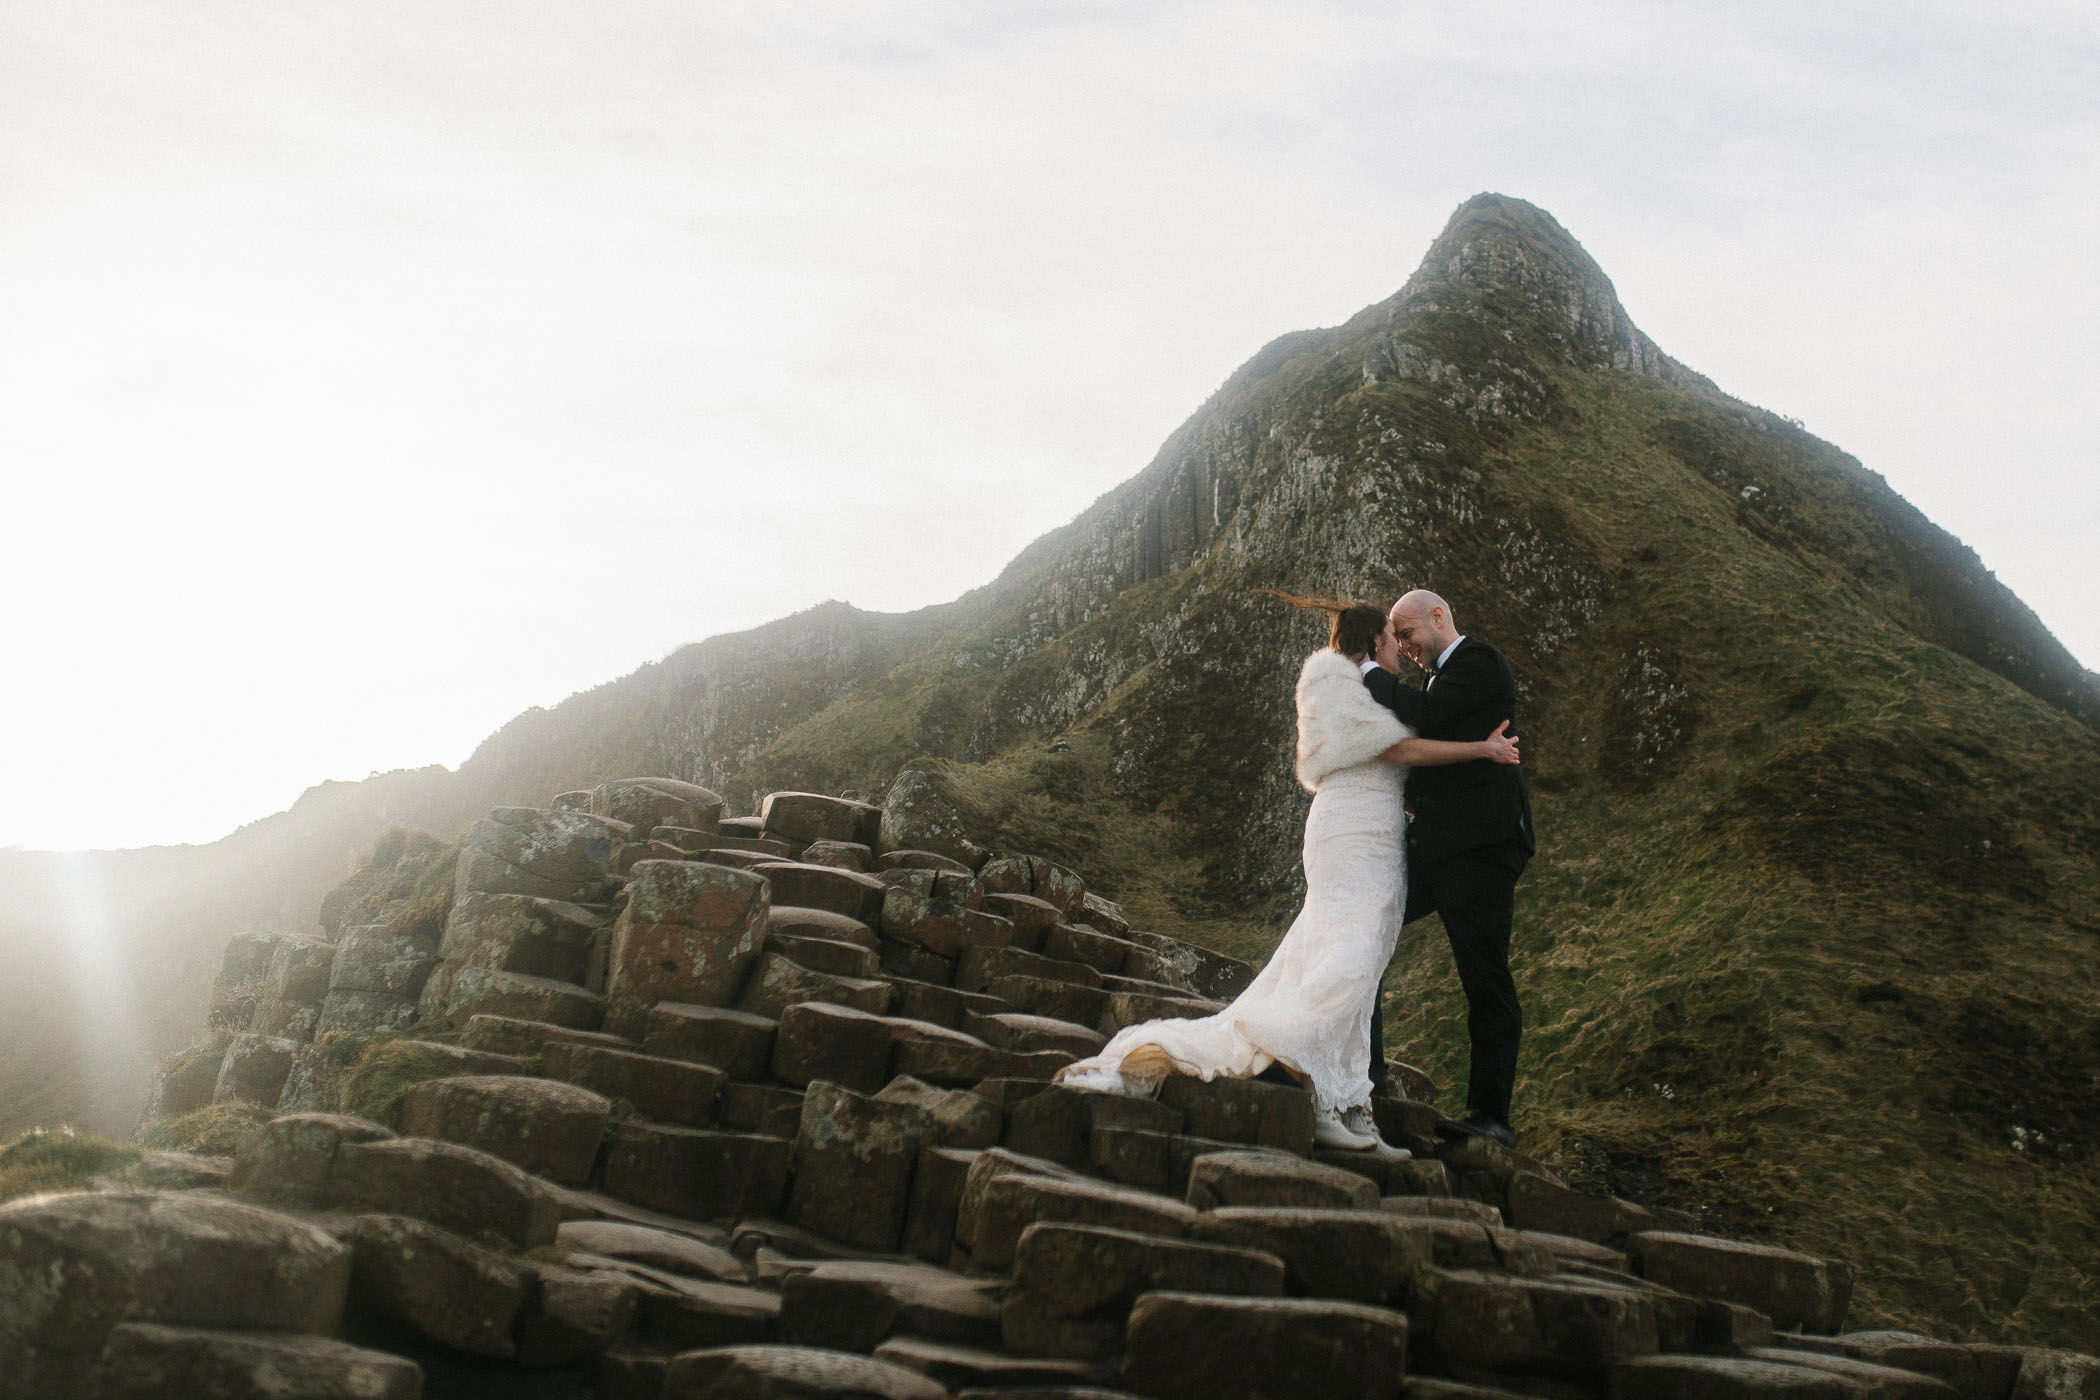 Newlyweds on a rocky outcrop with a mountain in the background and winter sunshine setting behind them. By Luke Flint Photography